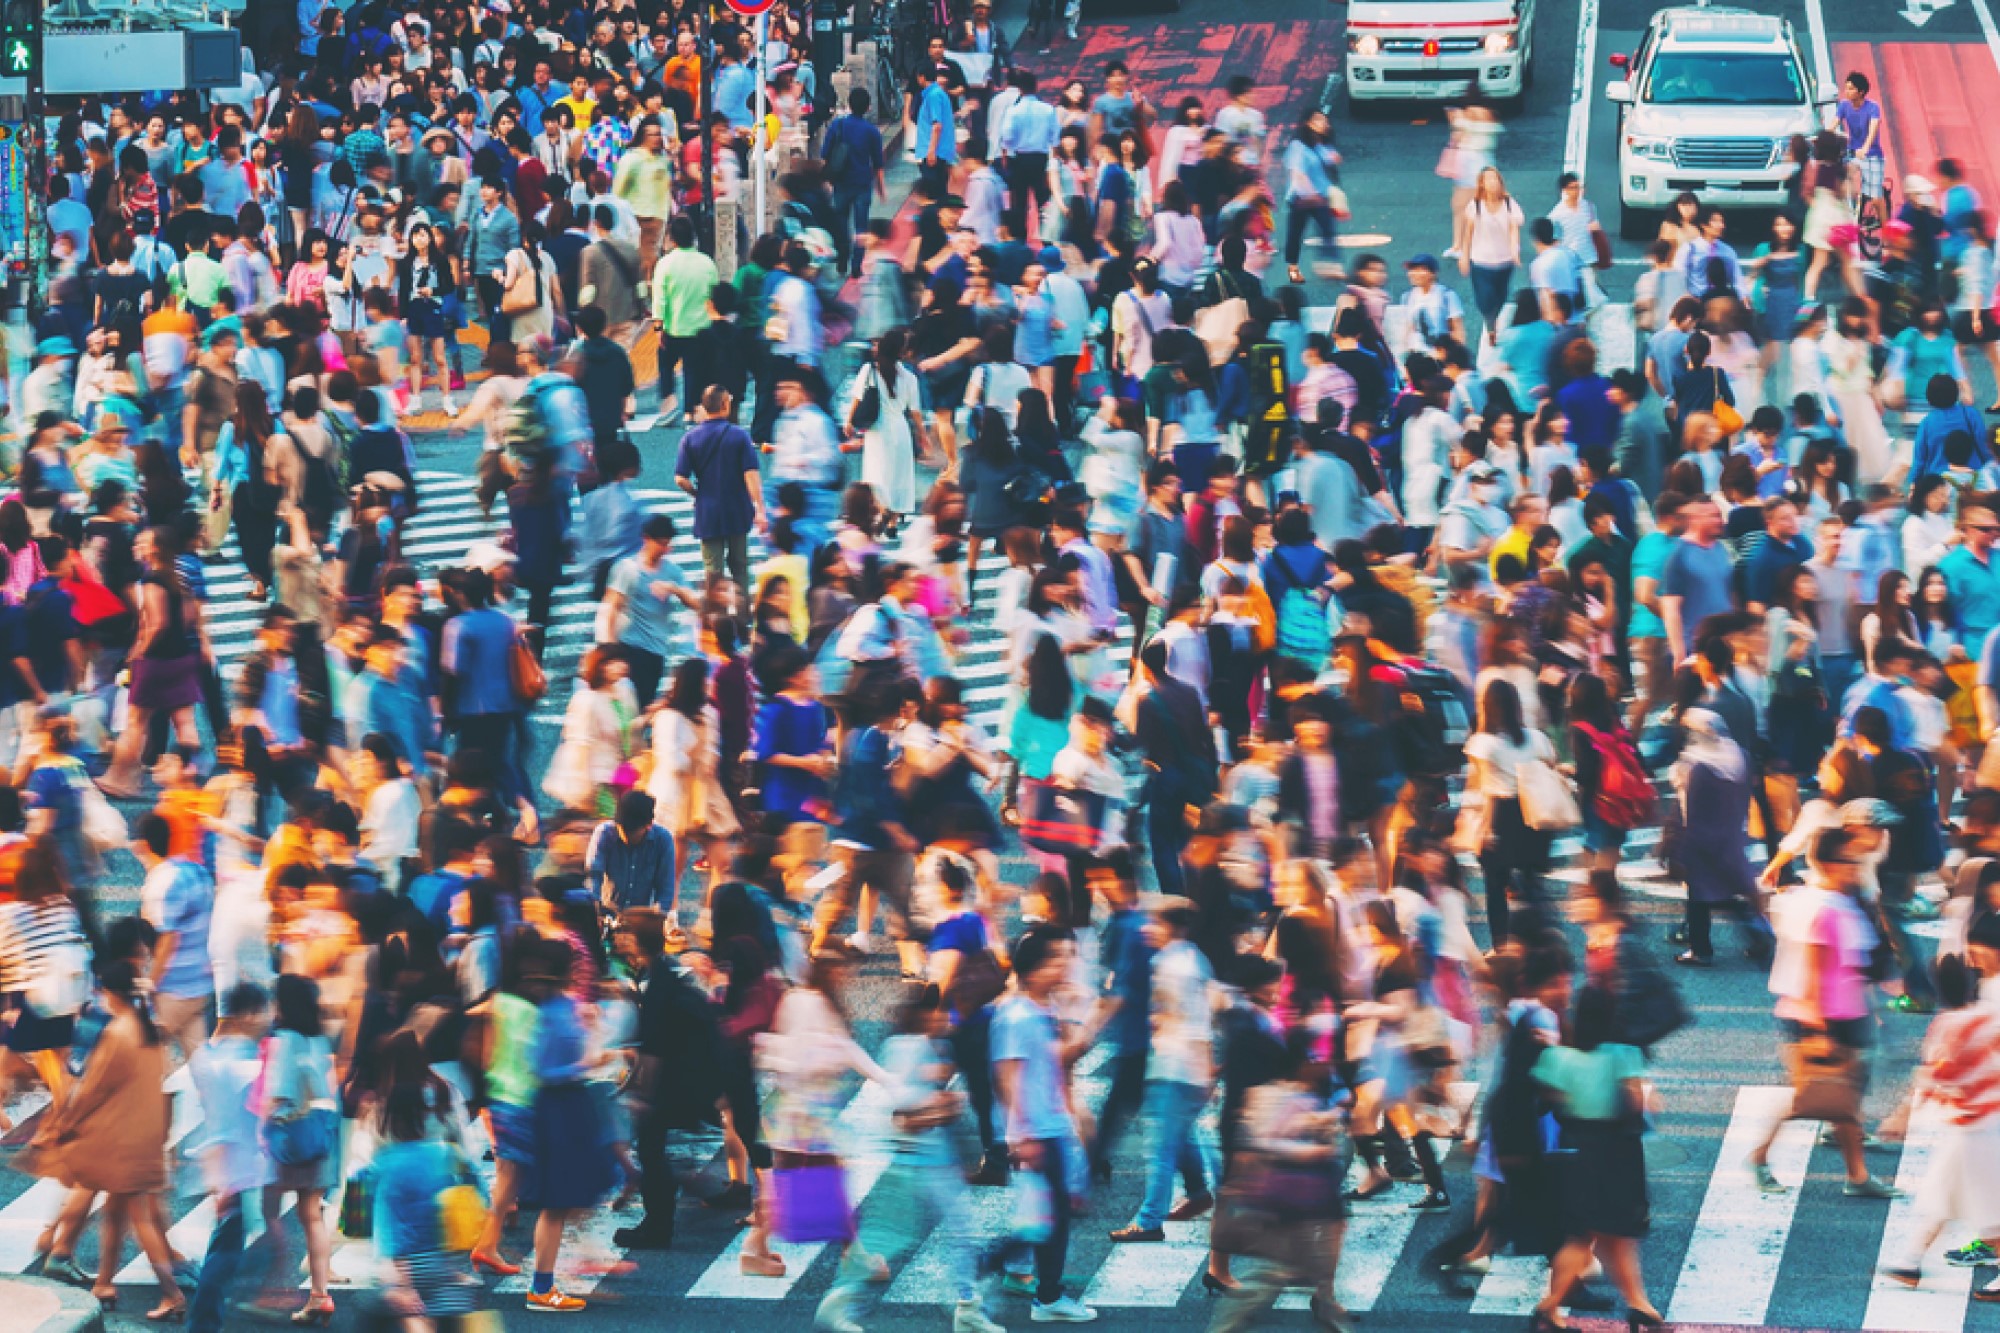 photograph of crowded pedestrian intersection